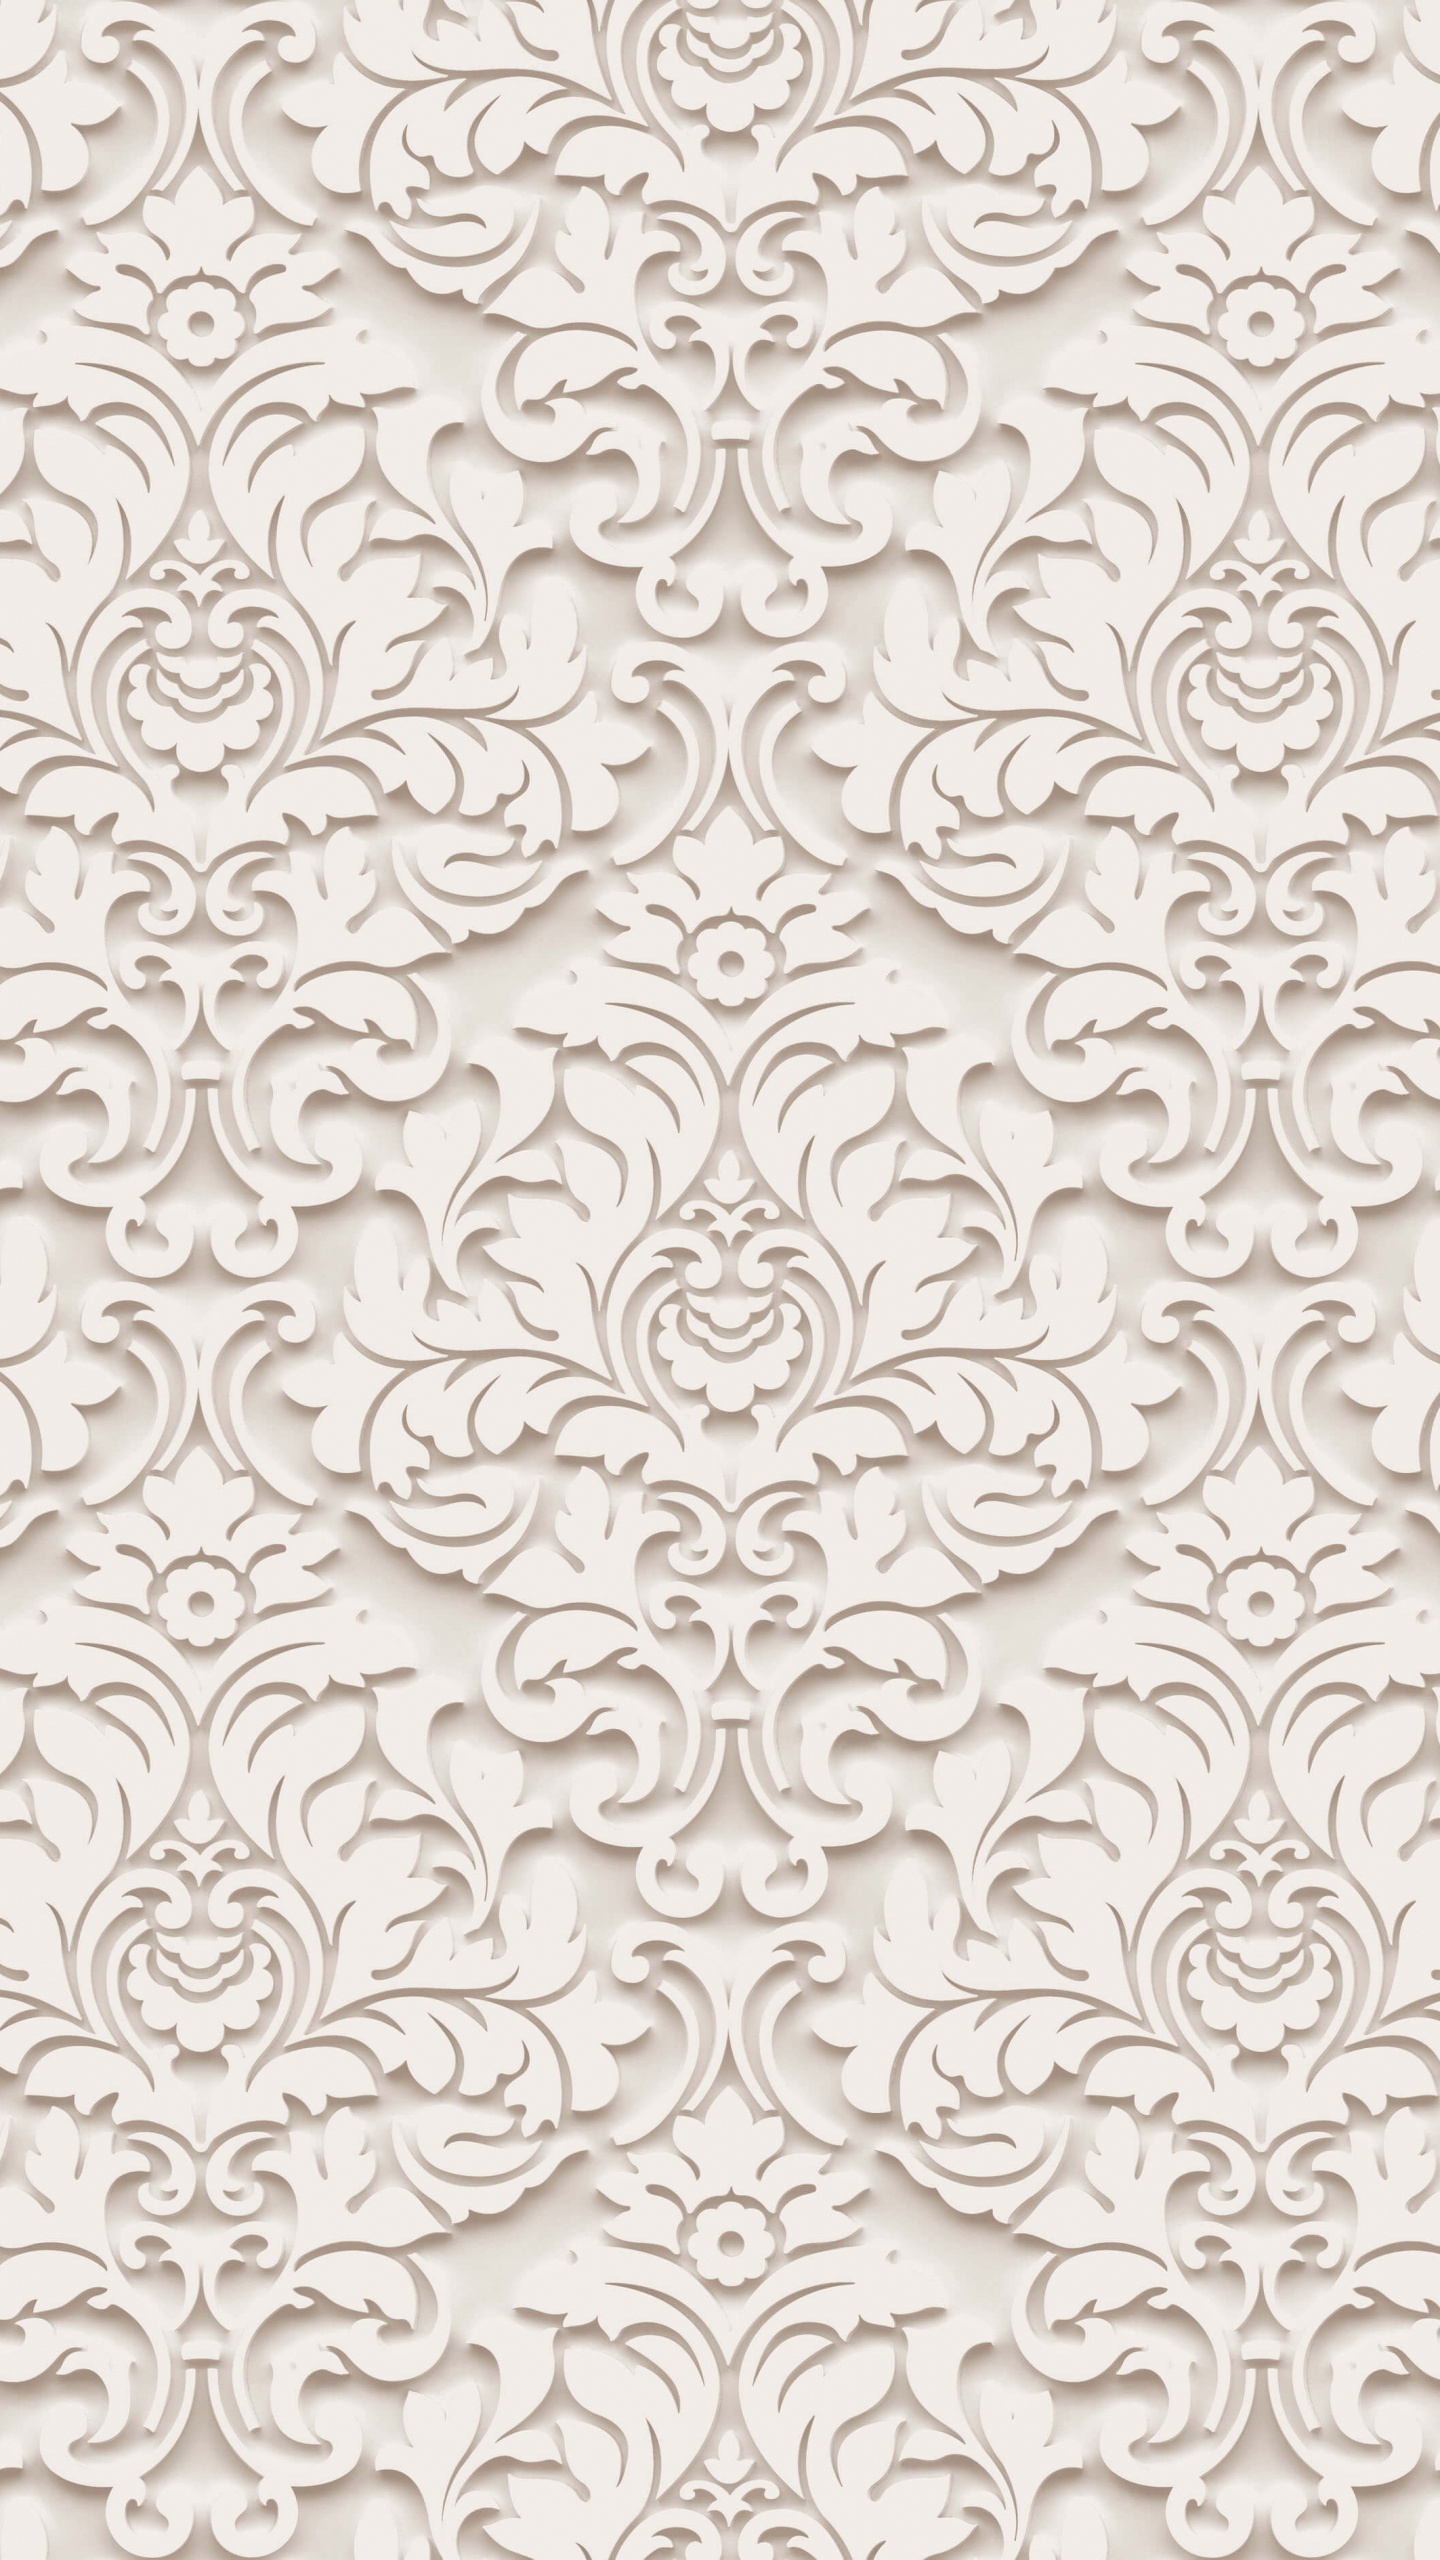 White and Black Floral Textile. Wallpaper in 1440x2560 Resolution